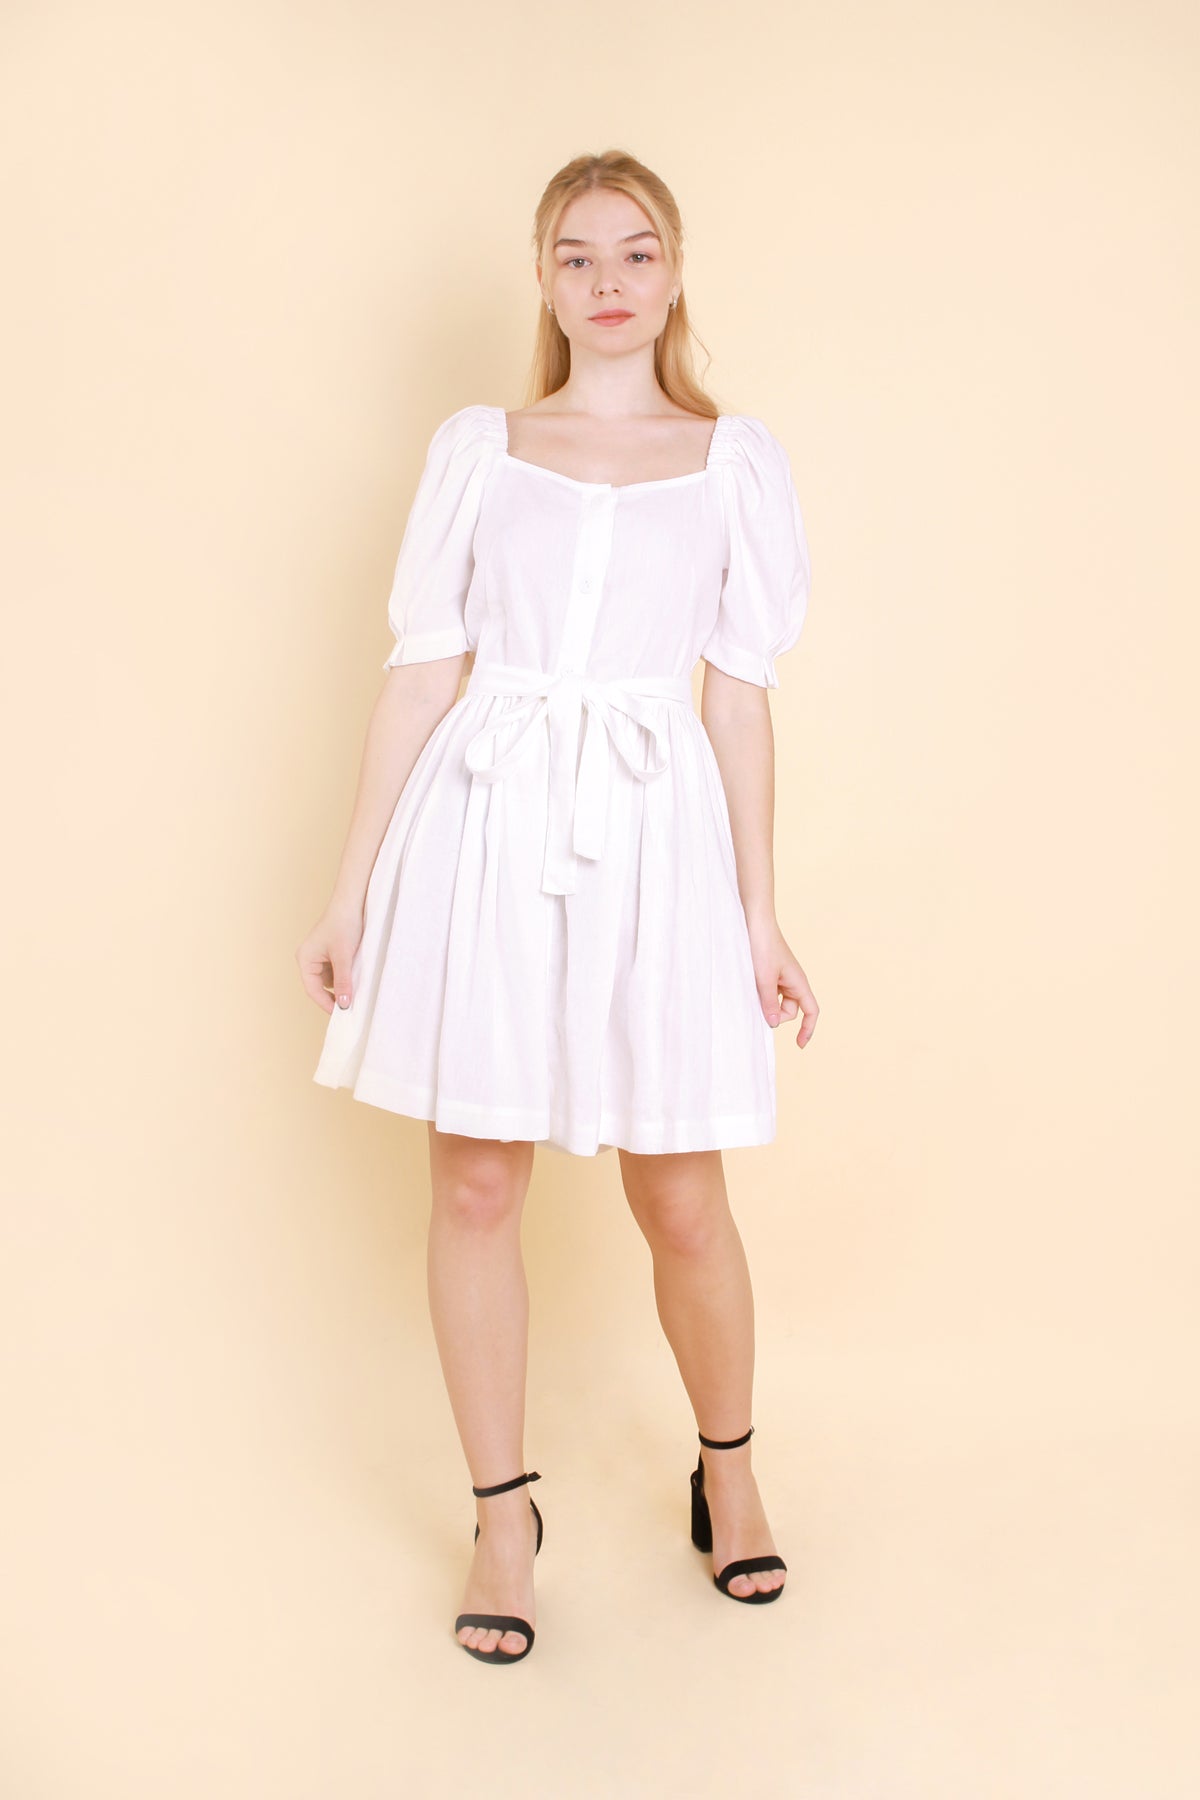 A short and stylish dress is made with linen fabric. The dress features charming puff sleeves and comes with a belt that cinches the waist.